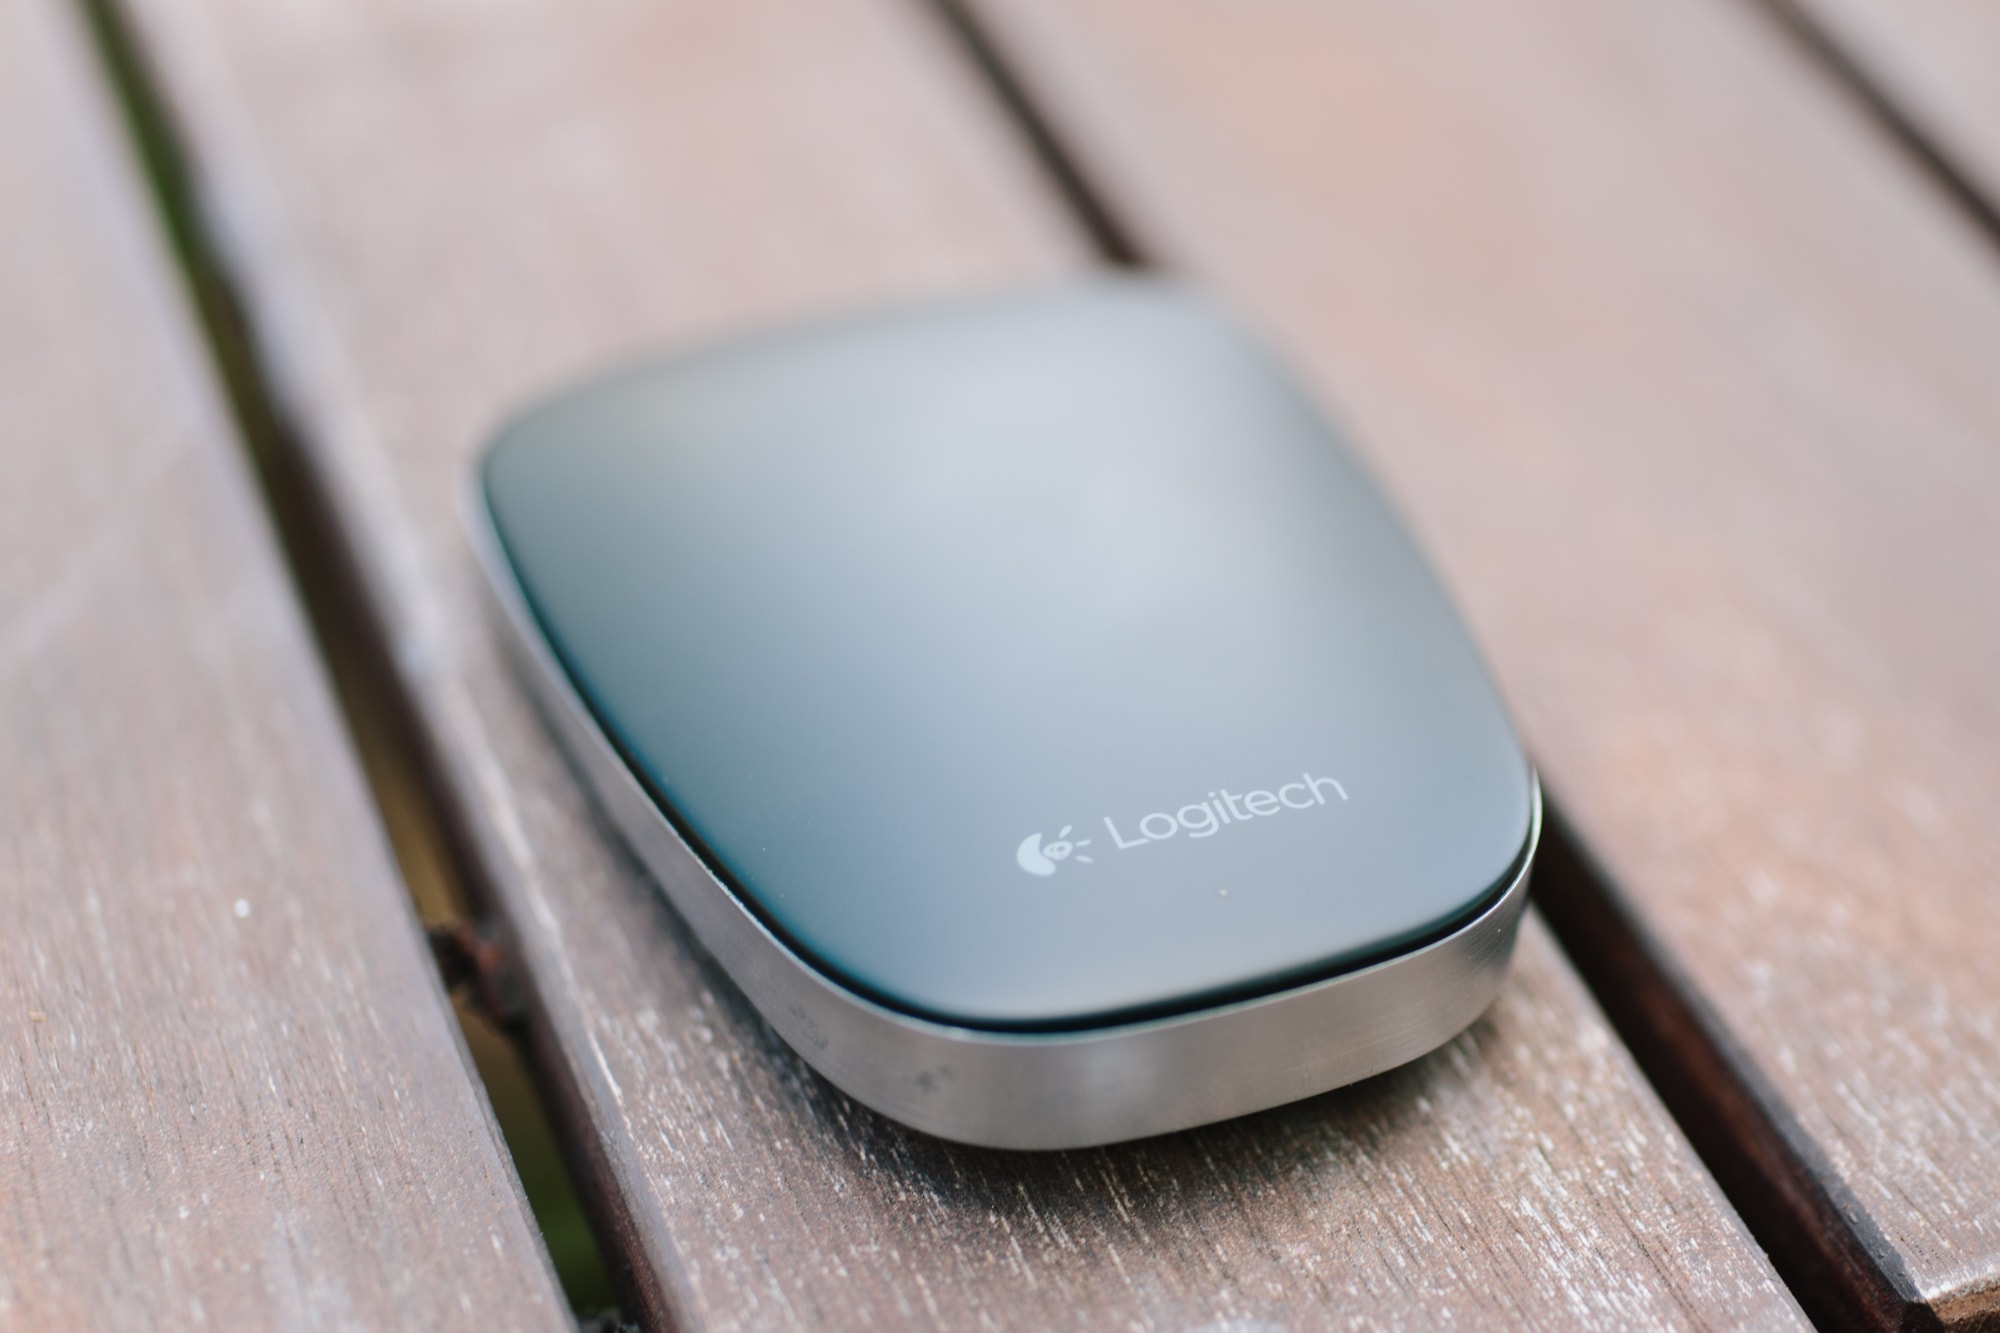 REVIEW: Logitech Mouse Gets The Job Done